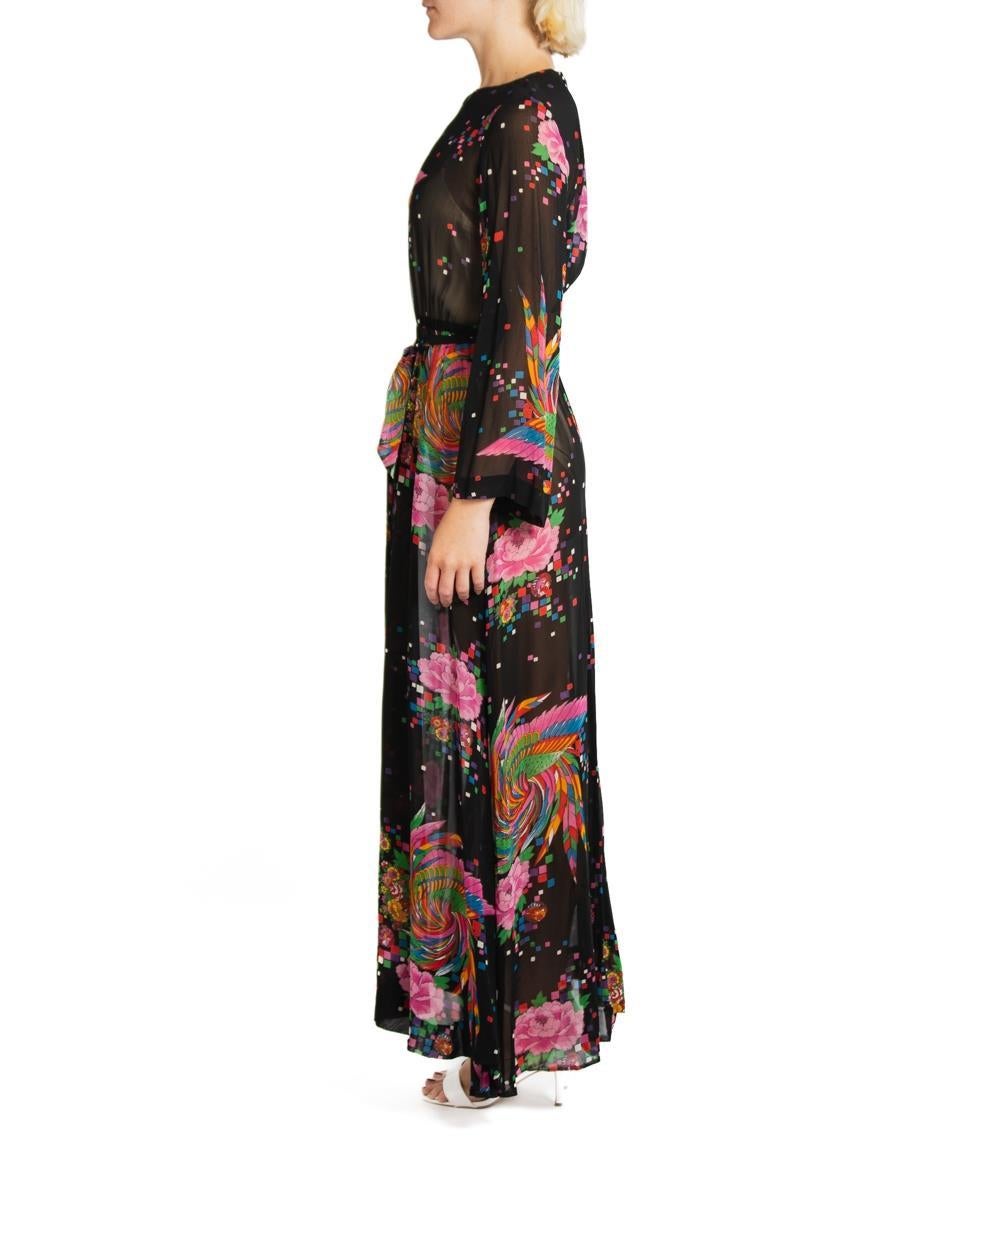 Women's 1970S Malcolm Starr Black & Floral Rayon Sheer Dress Made In Italy For Sale